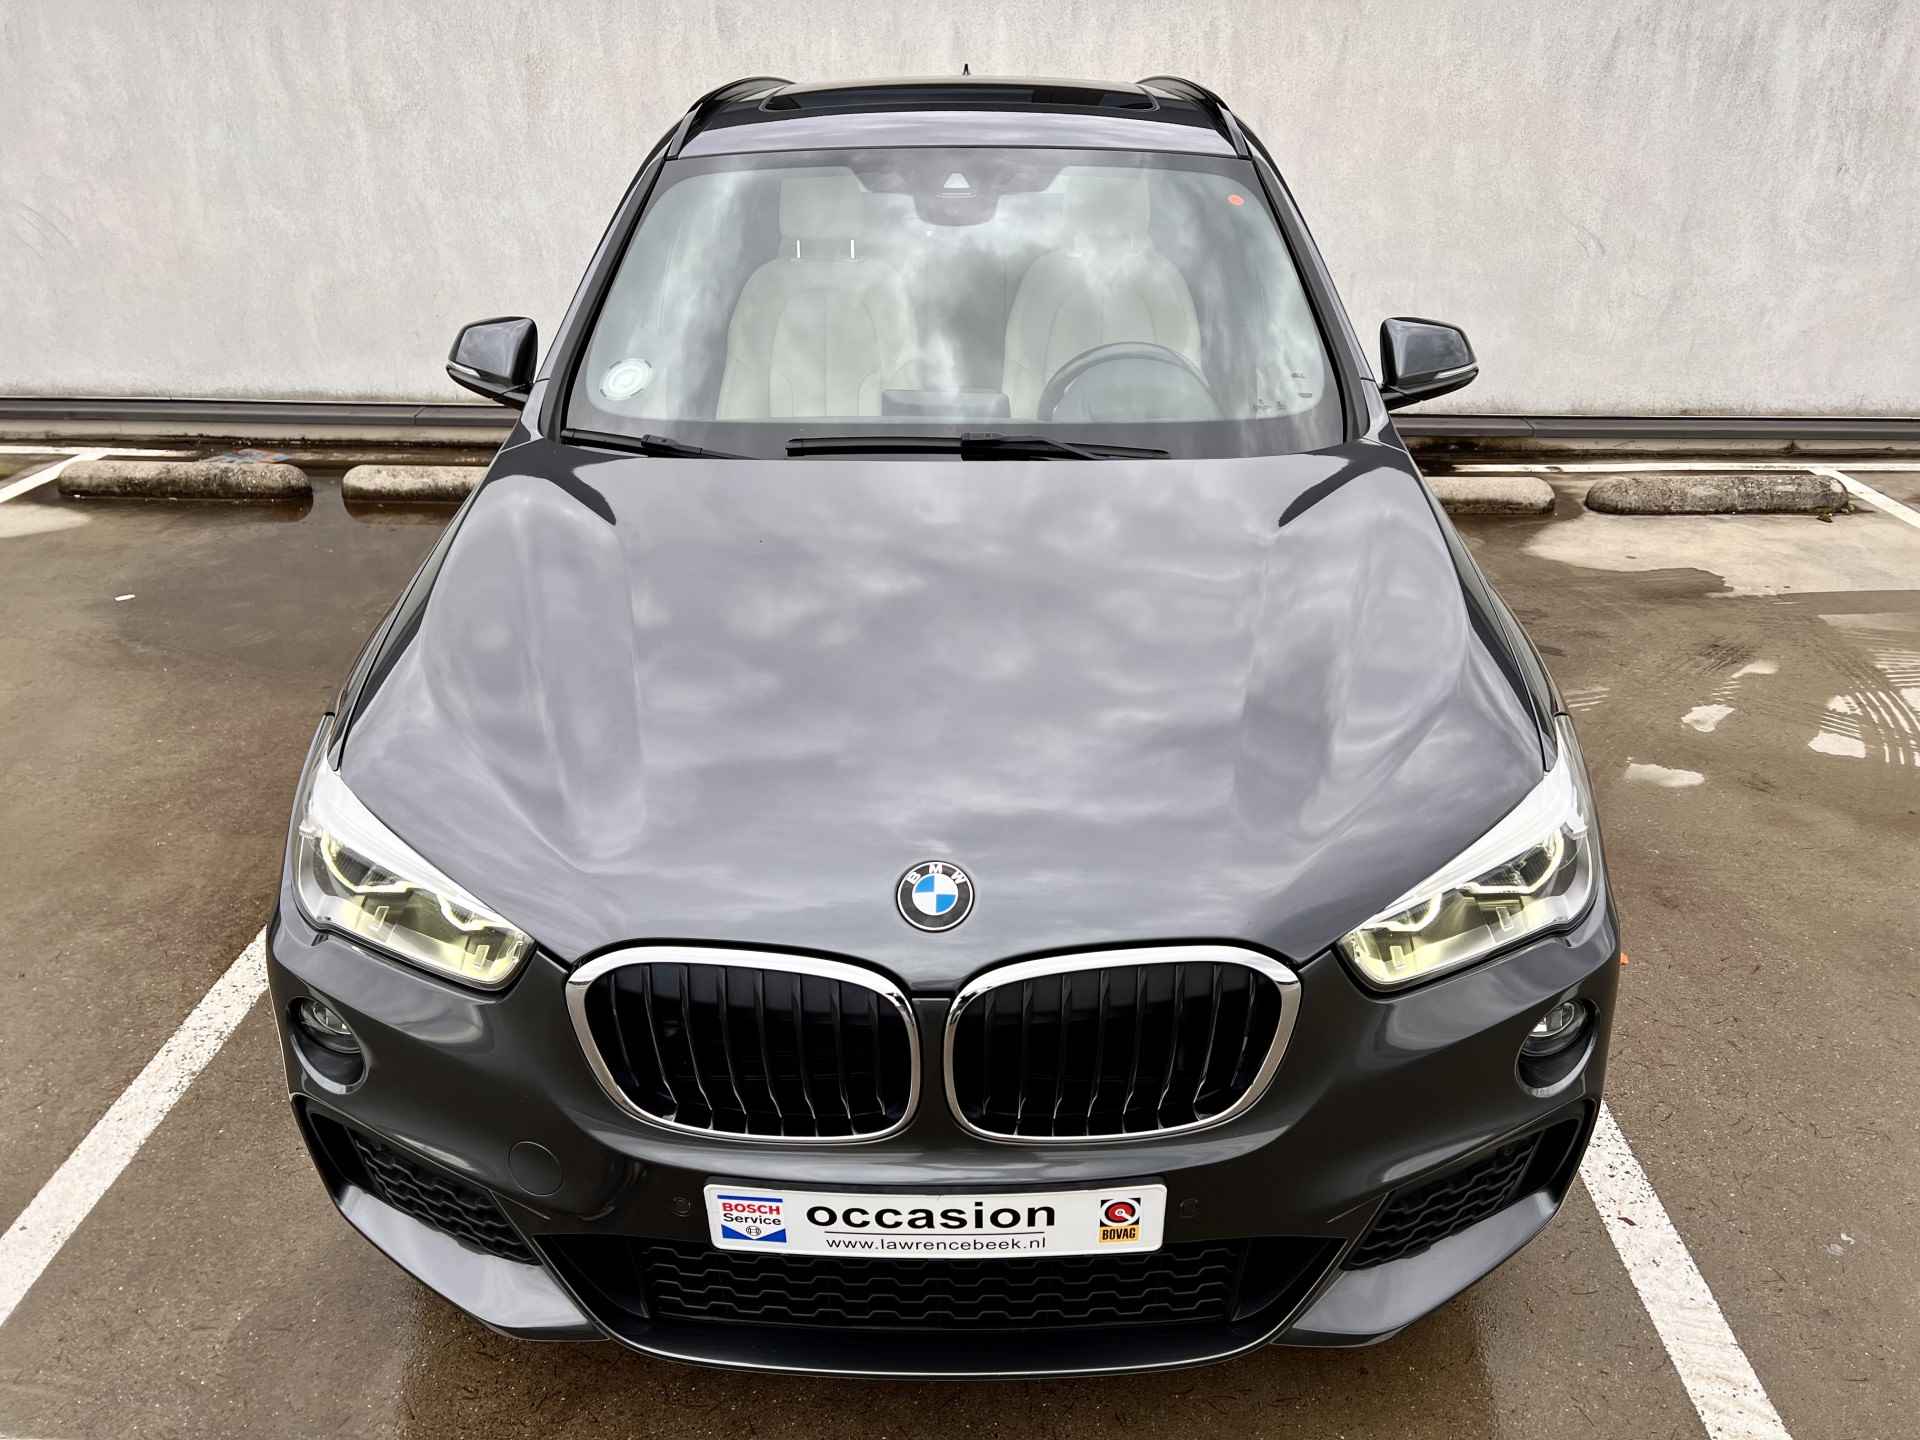 BMW X1 xDrive25i M Sport 231 PK | Leer | Pano |Head Up | Camera | % Bovag Occasion Partner % - 16/48